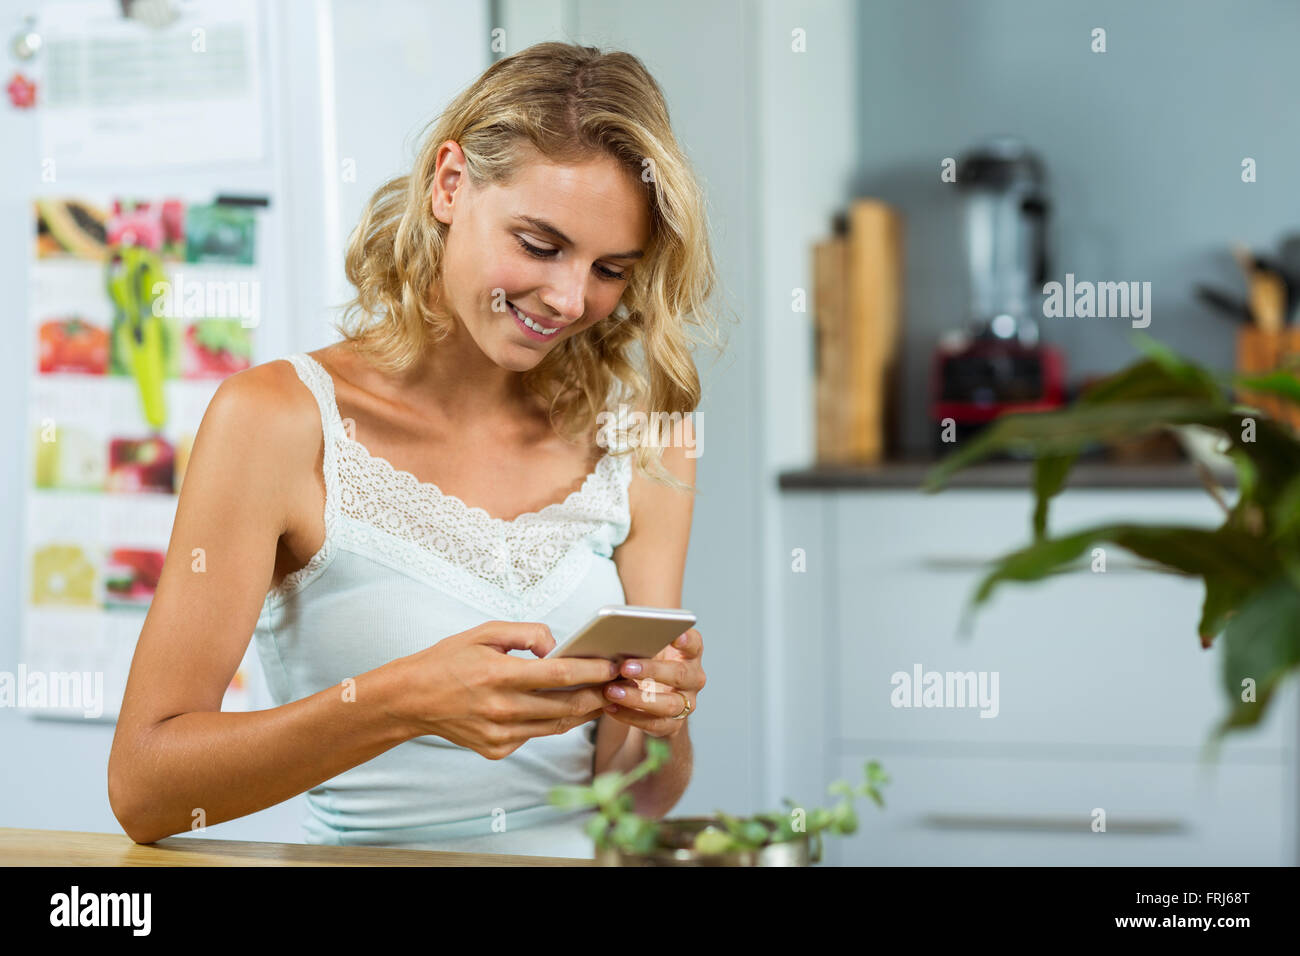 Beautiful woman holding mobile phone Banque D'Images